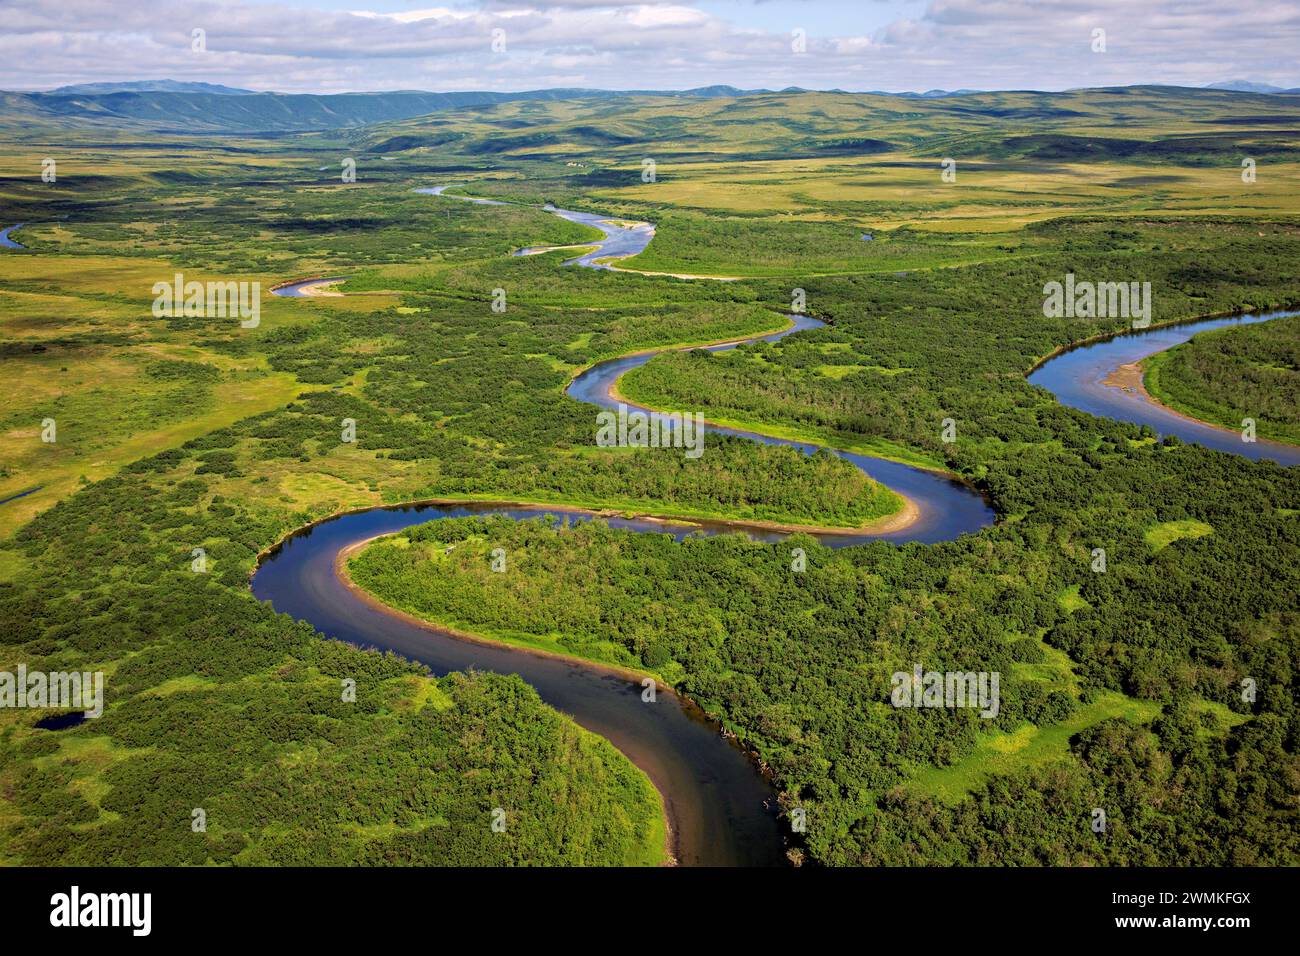 River ecosystem for salmon spawning is braided and full of nutrients as it meanders through the tundra; Kamchatka, Russia Stock Photo